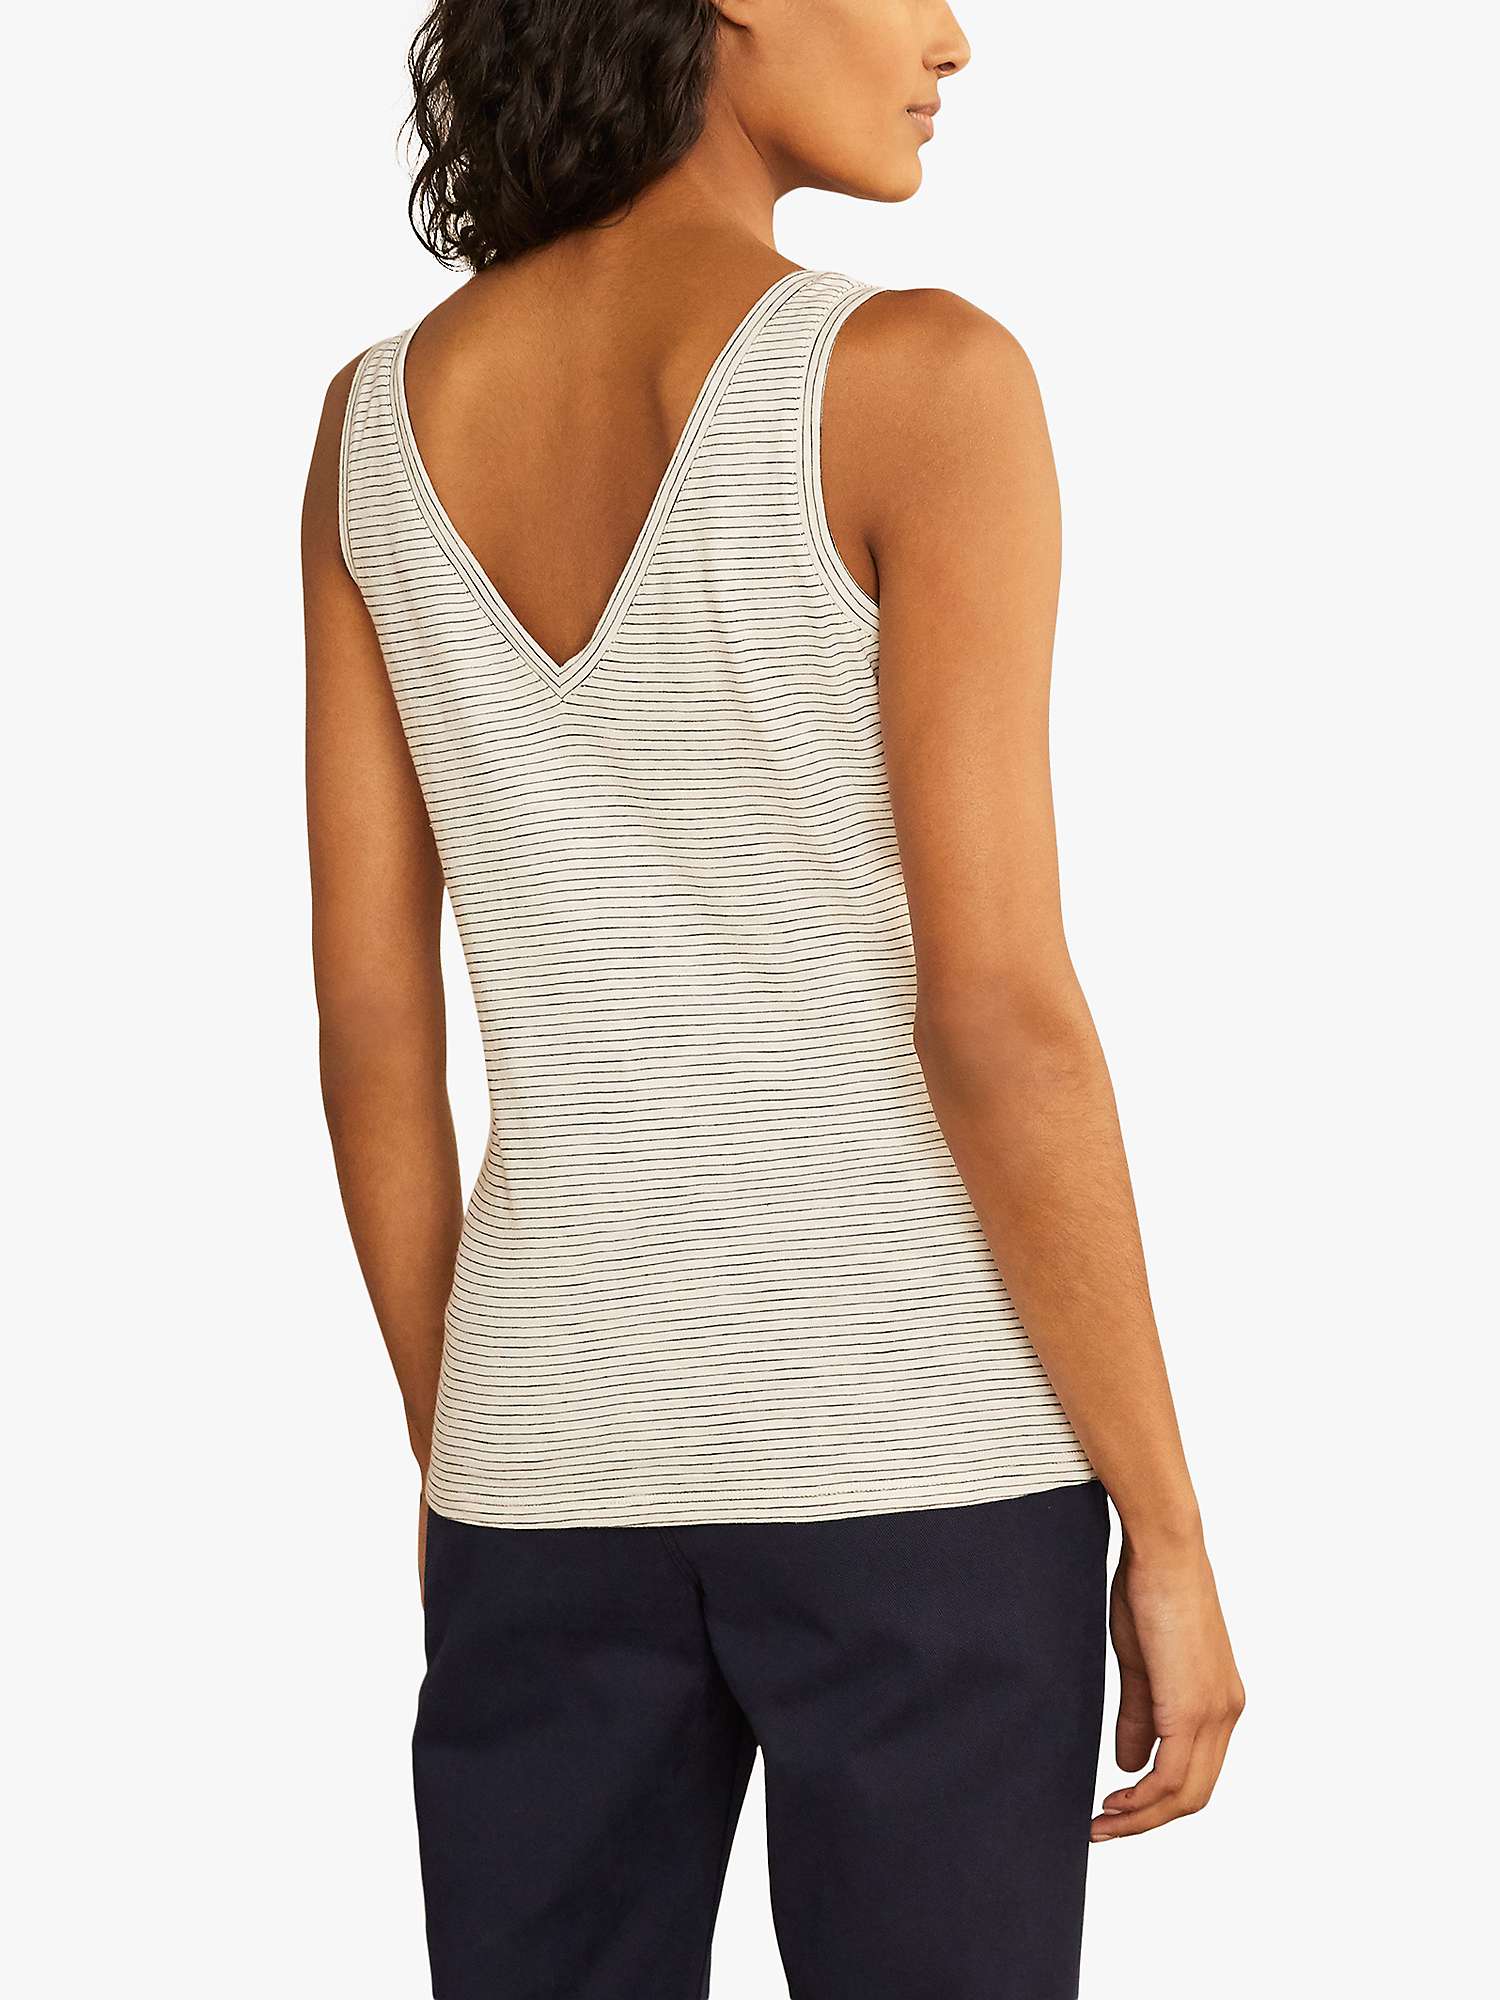 Boden The Cotton Vest, Ivory/Navy at John Lewis & Partners